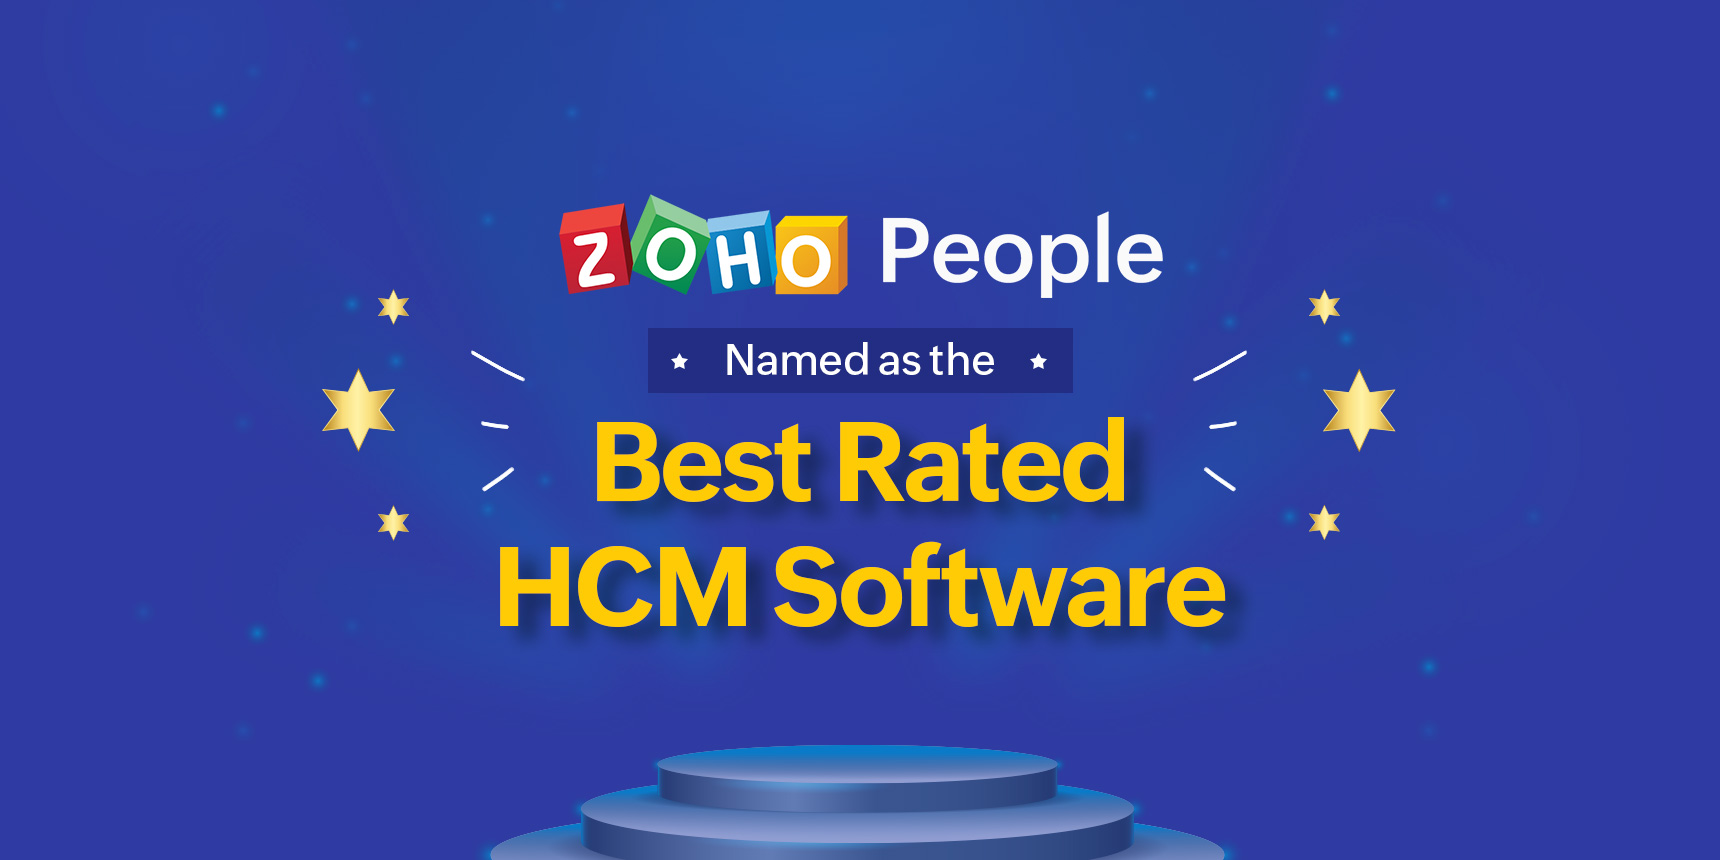 Zoho People named as the best HCM software